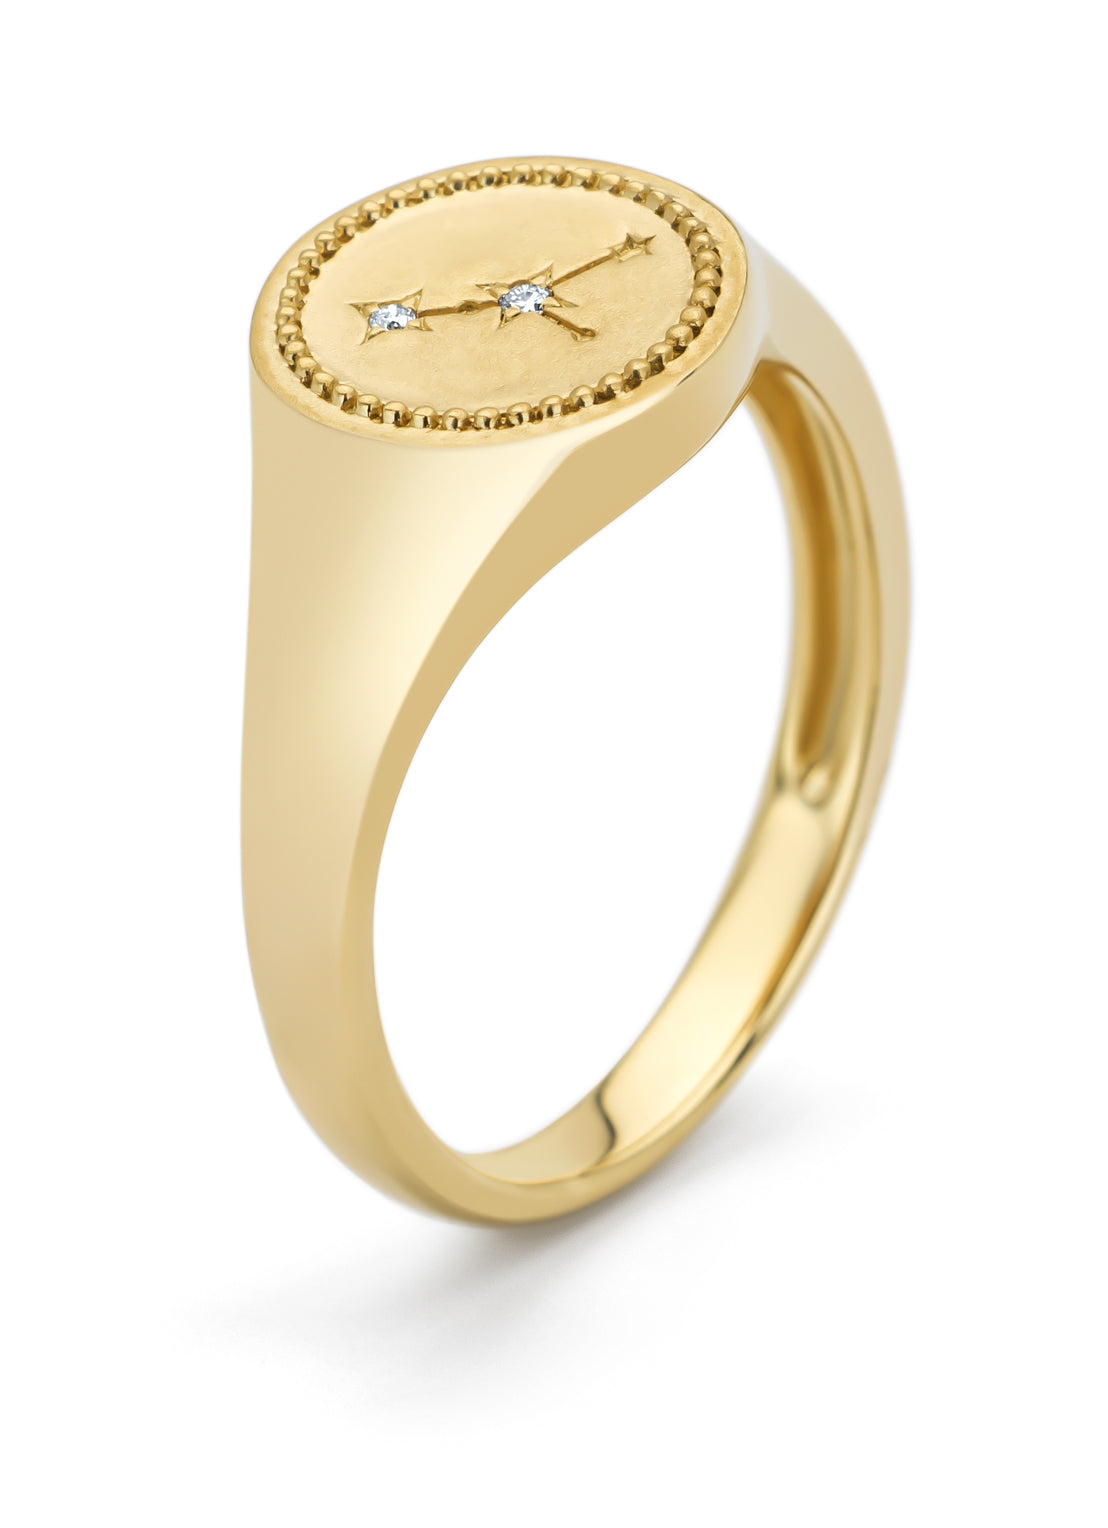 Yellow gold signet ring, zodiac cancer (lobster)